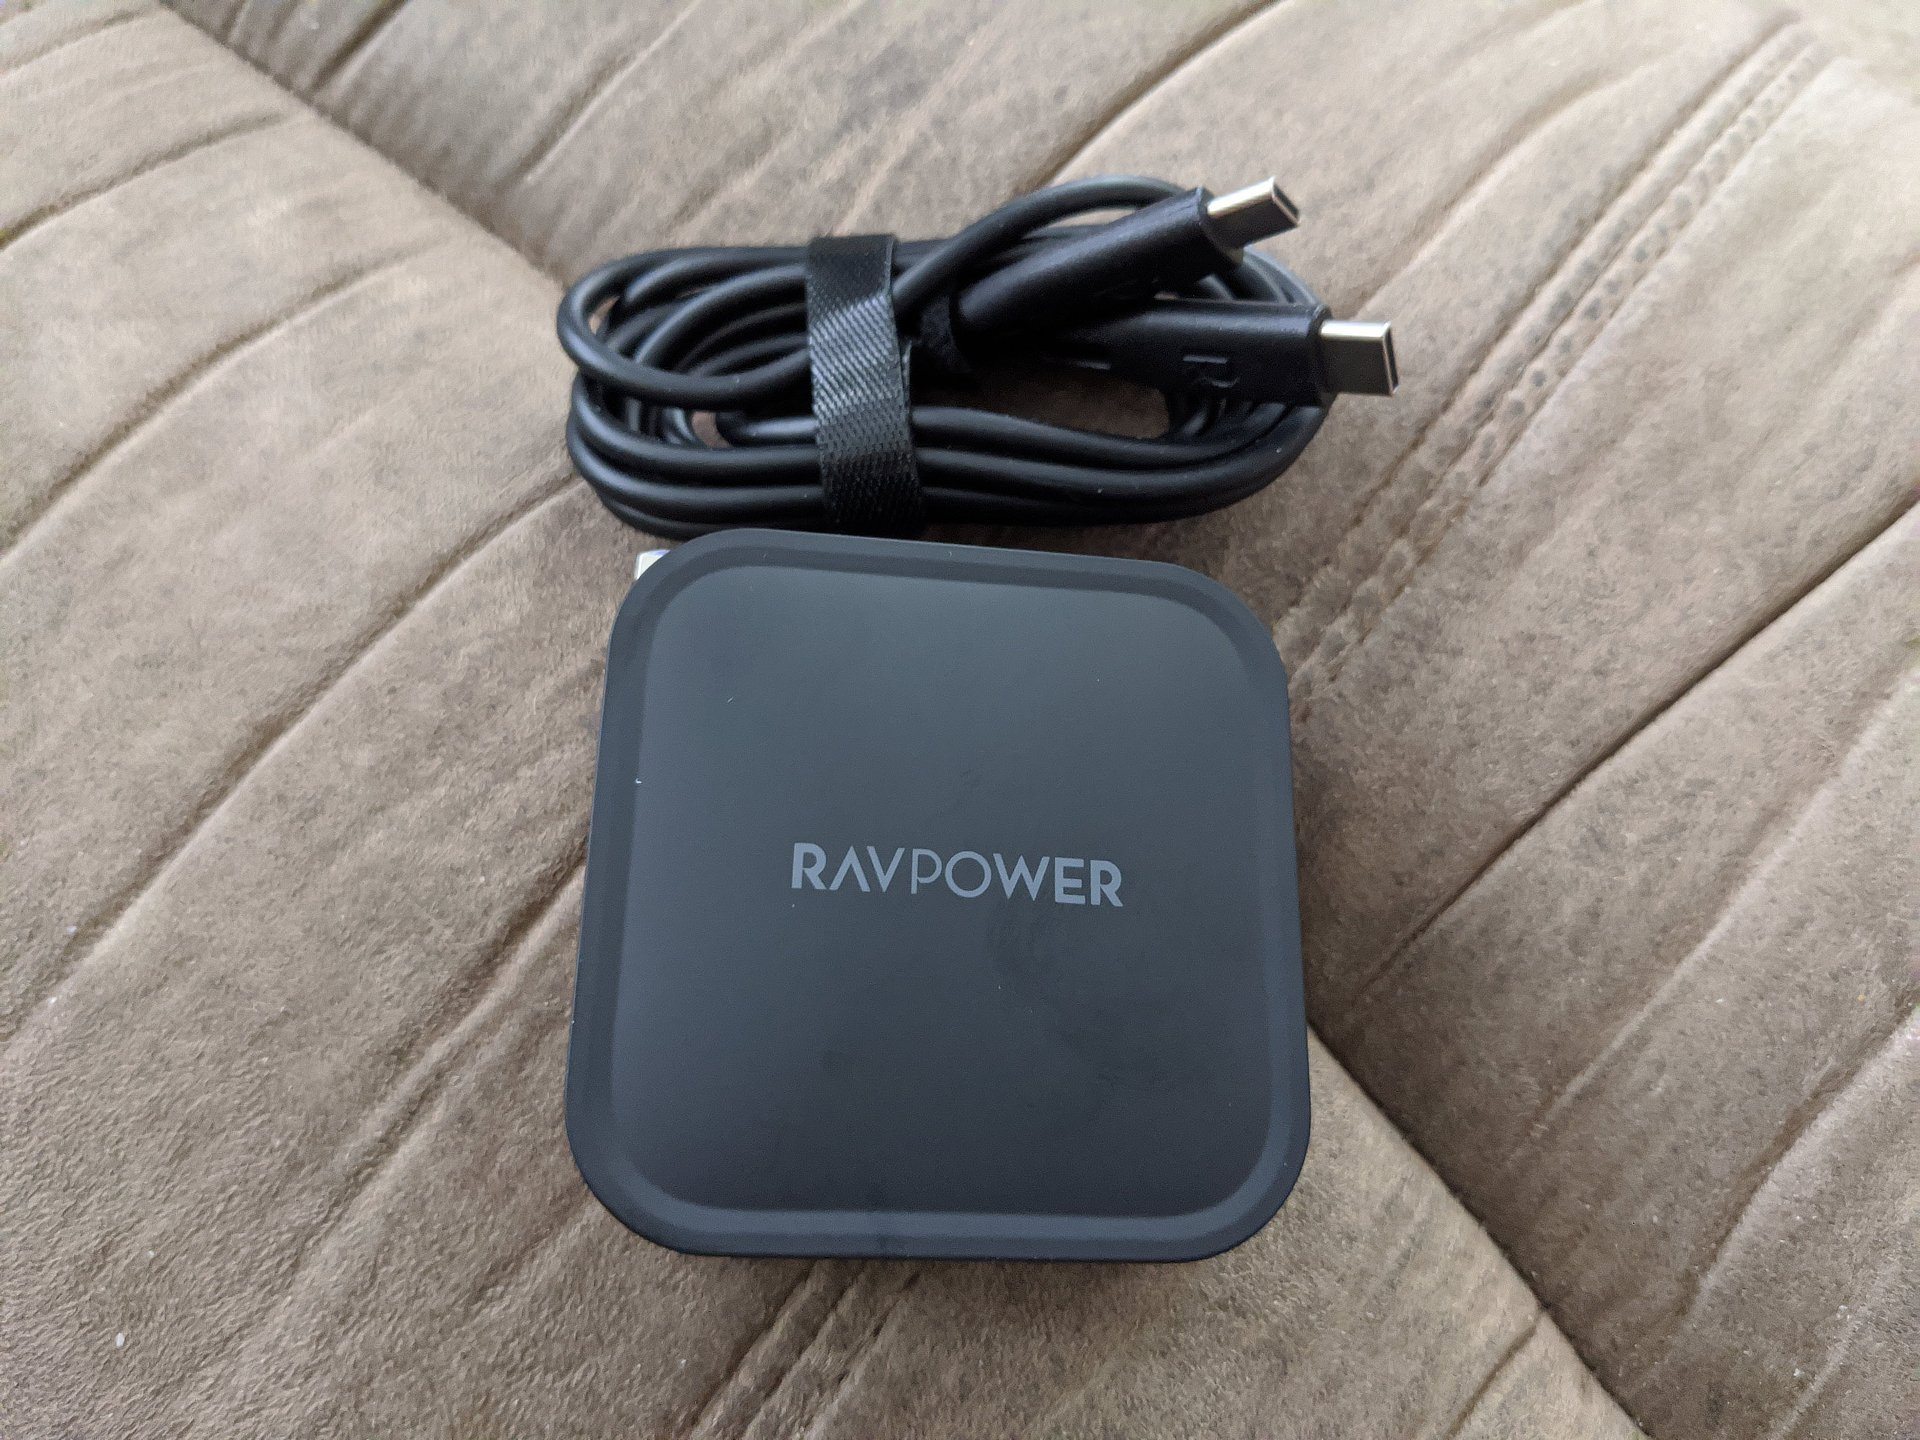 Best Usb Wall Charger 2020 - Ravpower 90W